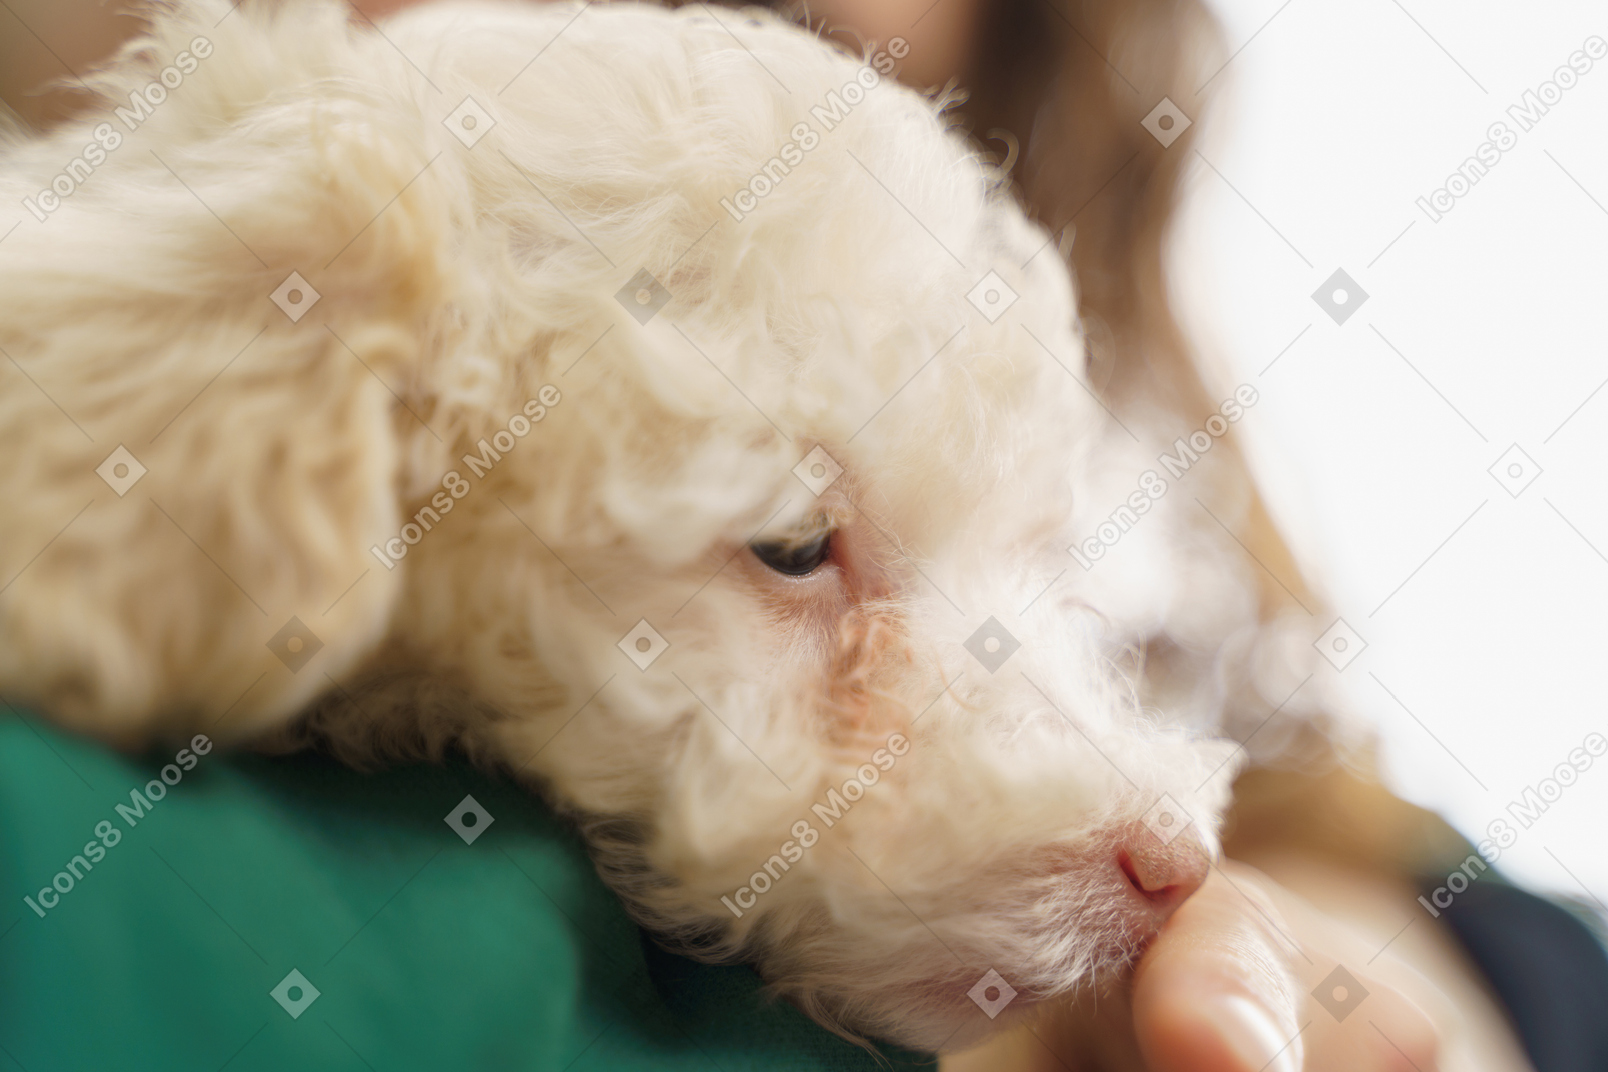 Close-up of a tiny white poodle embraced by a woman